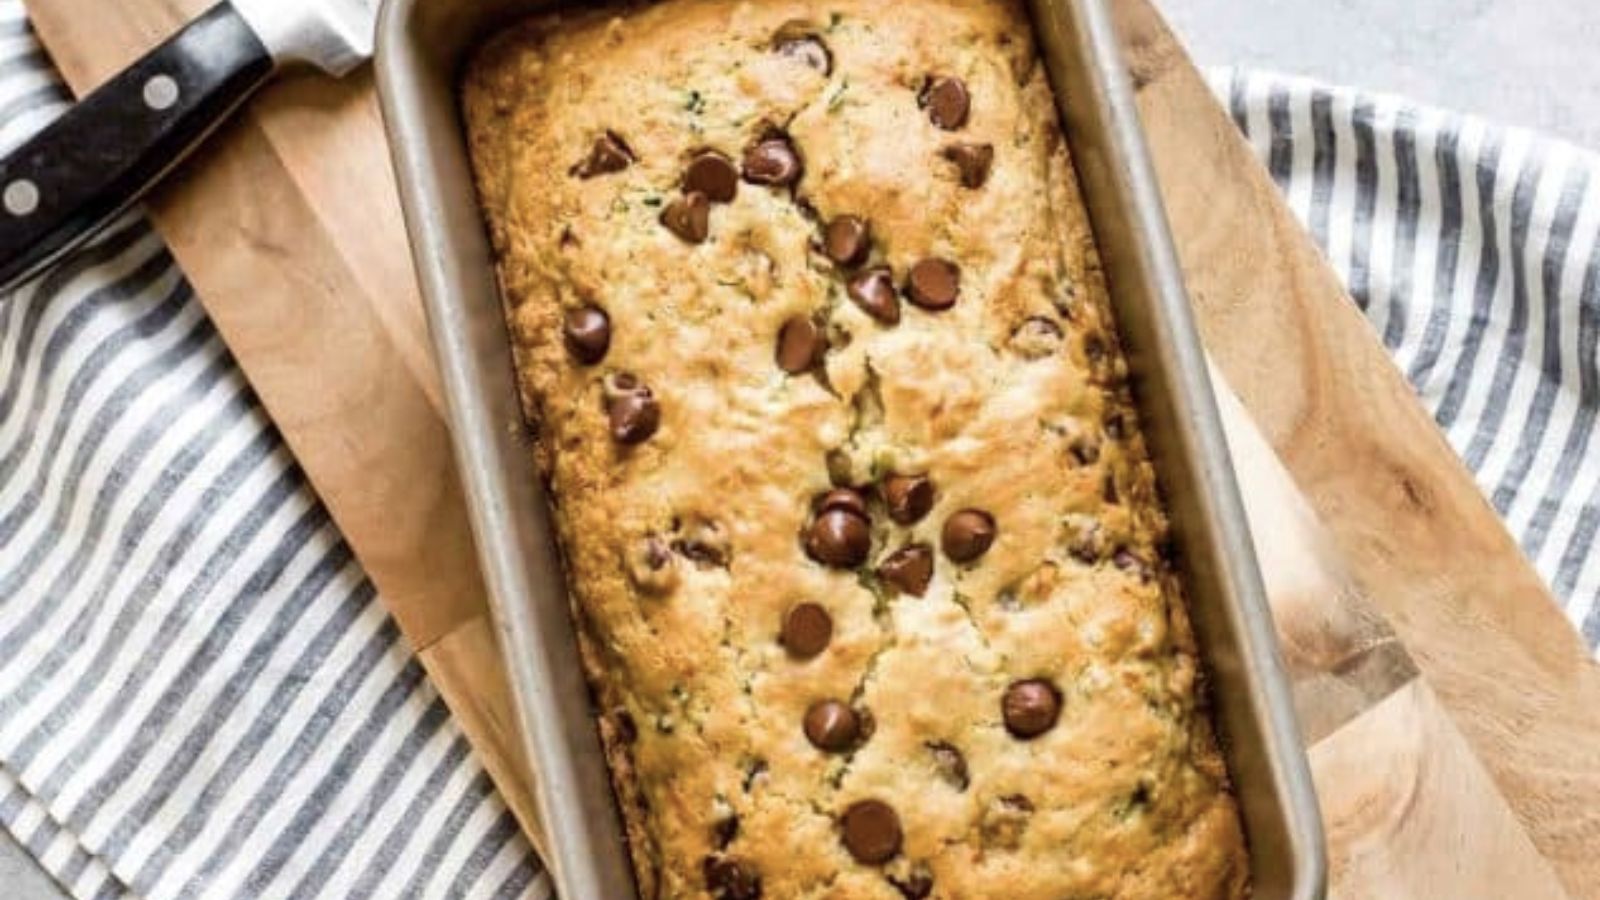 Loaf of zucchini bread topped with chocolate chips.
